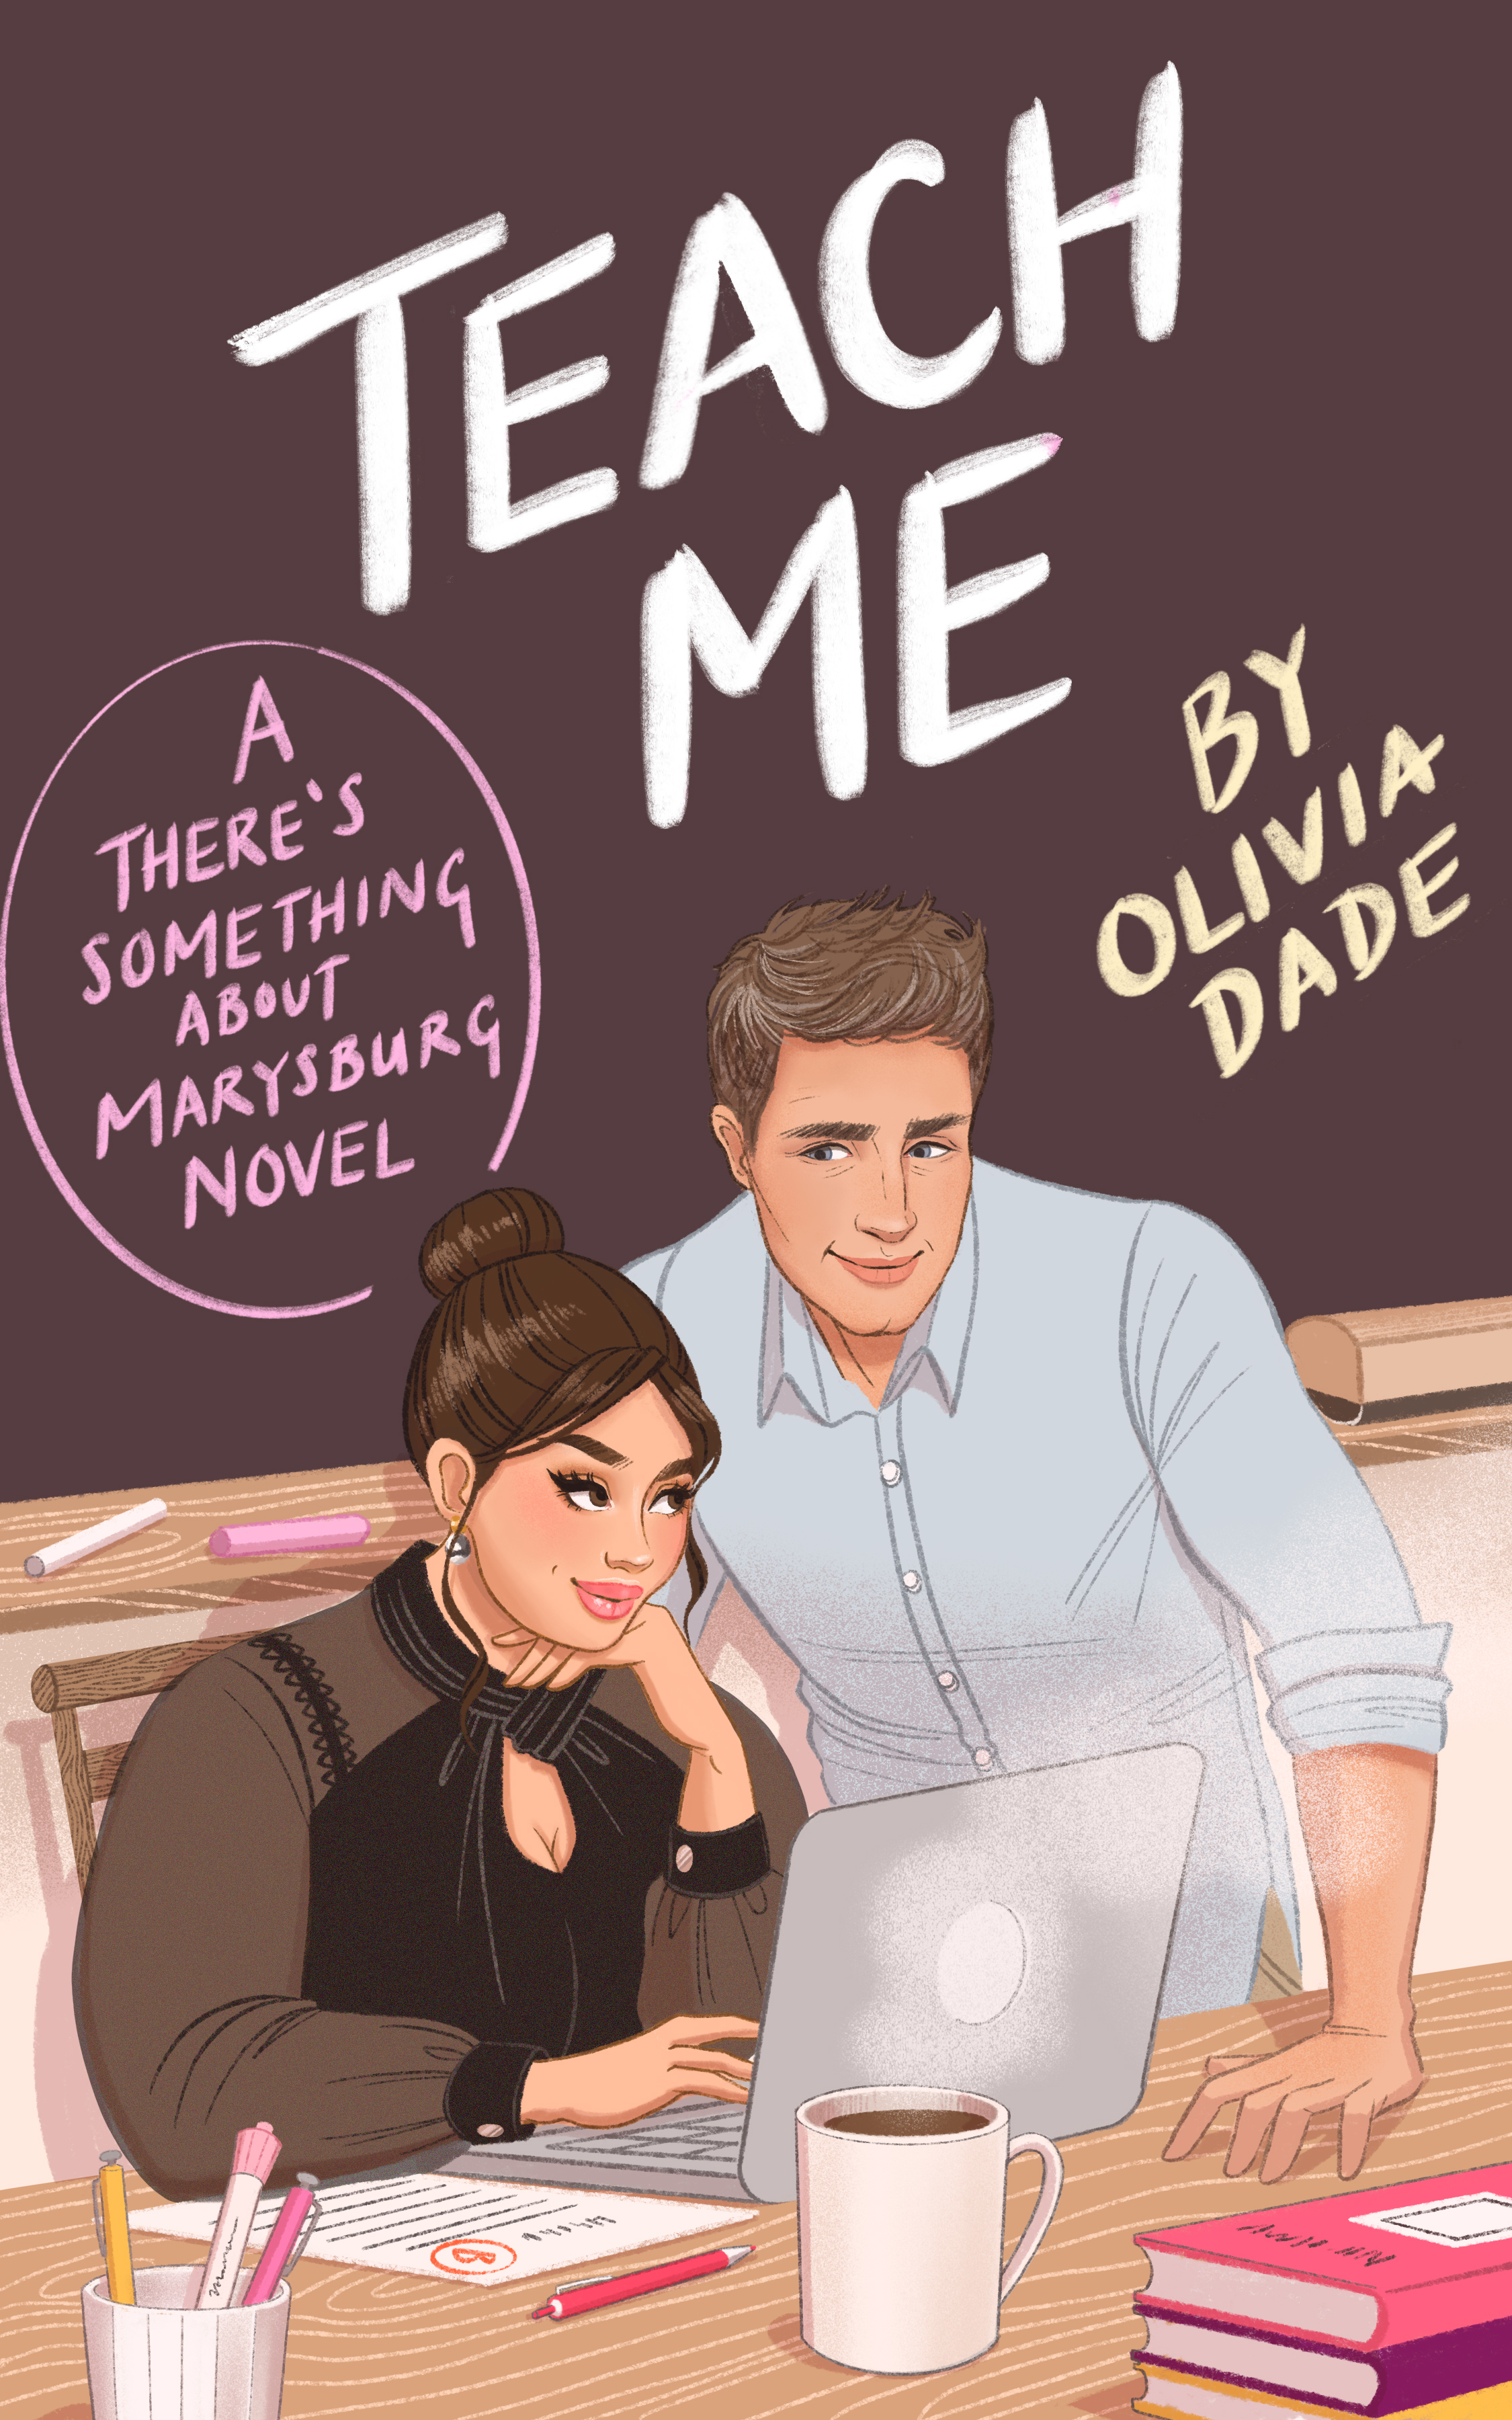 Teach Me (There's Something About Marysburg, #1) by Olivia Dade ...